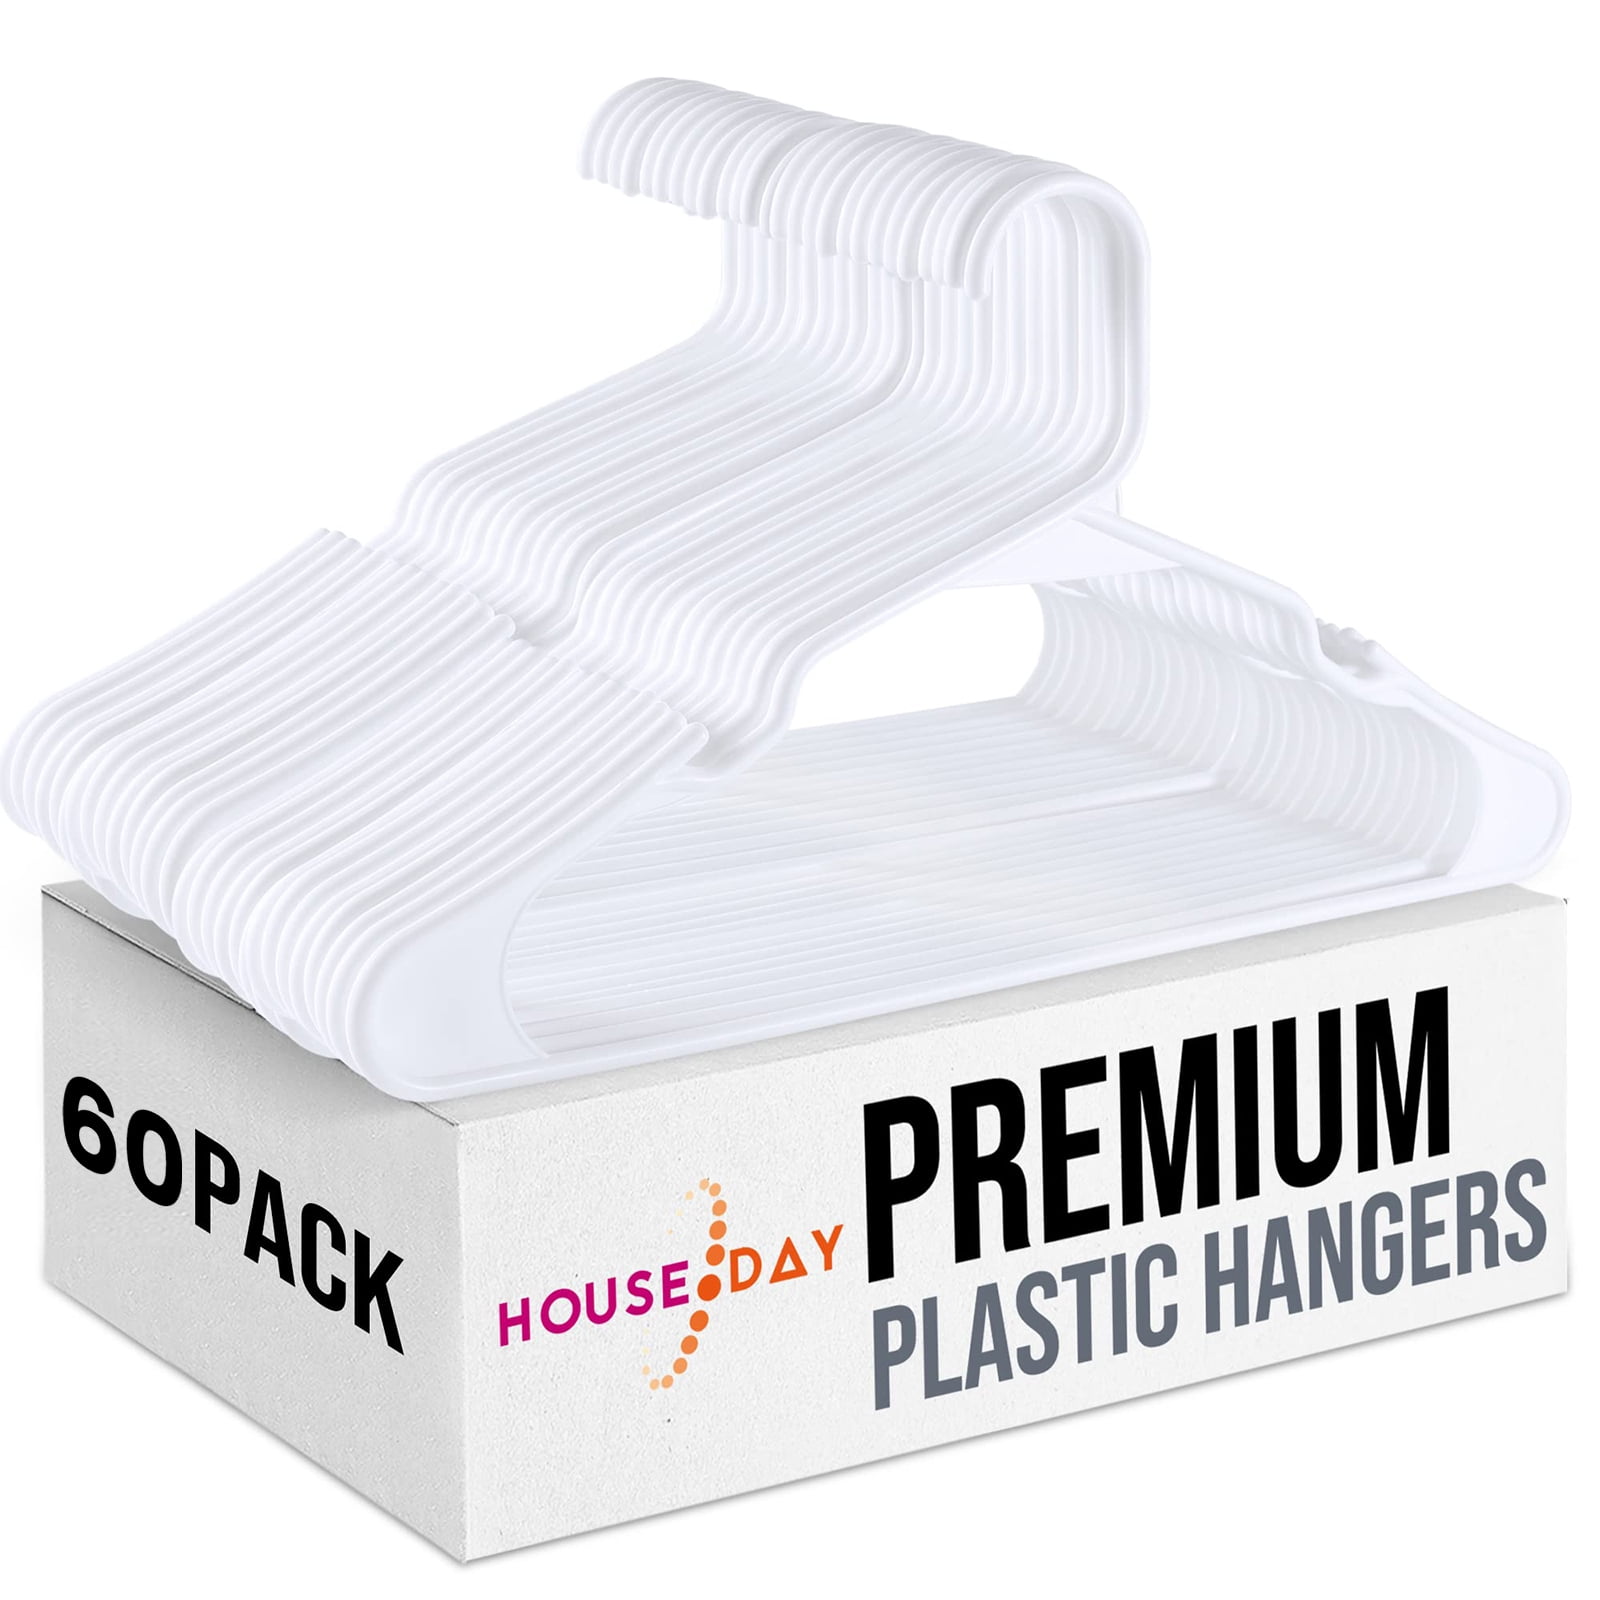 60-Count Adult Hangers, White